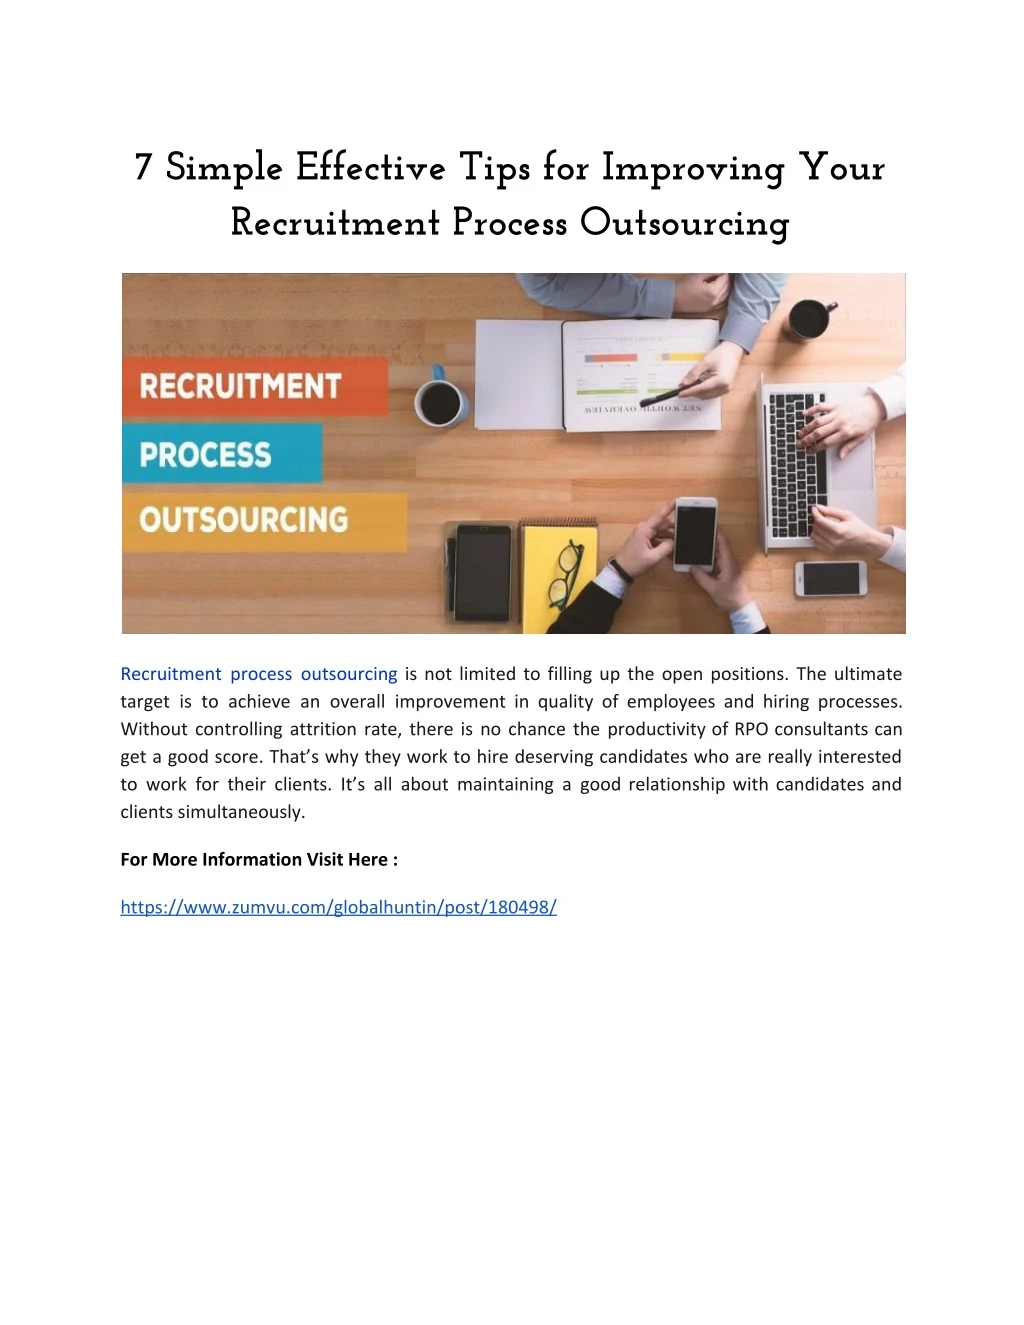 7 simple effective tips for improving your